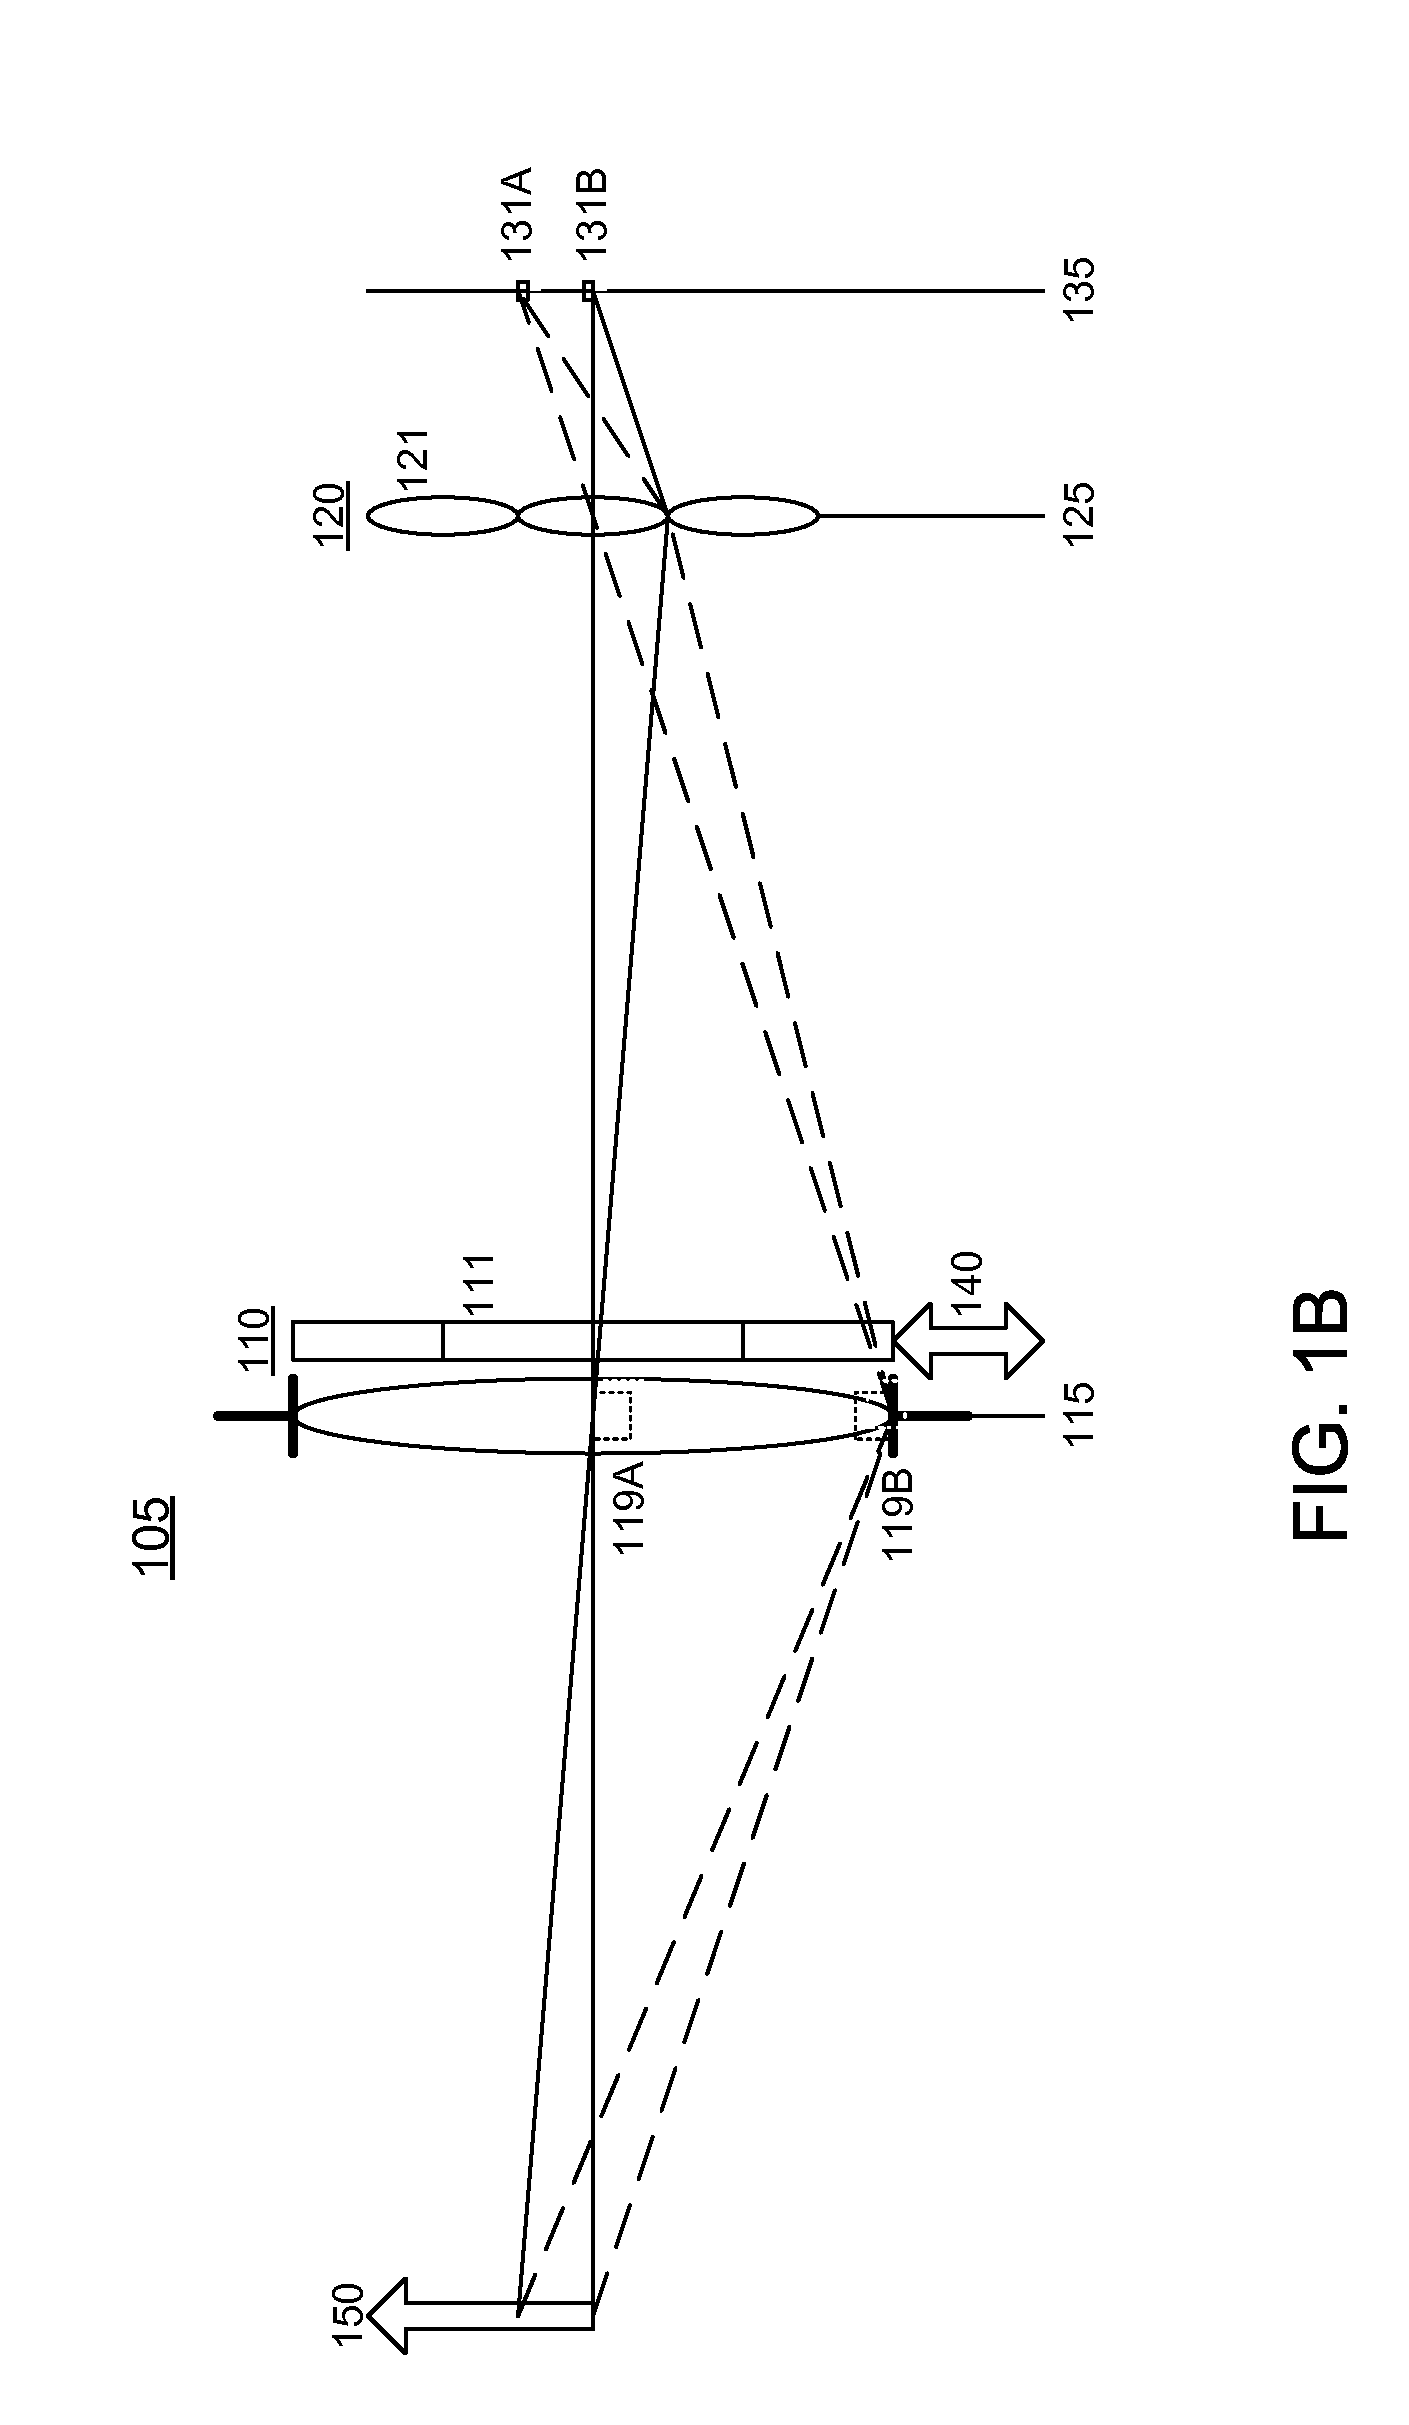 Adjustable multimode lightfield imaging system having an actuator for changing position of a non-homogeneous filter module relative to an image-forming optical module